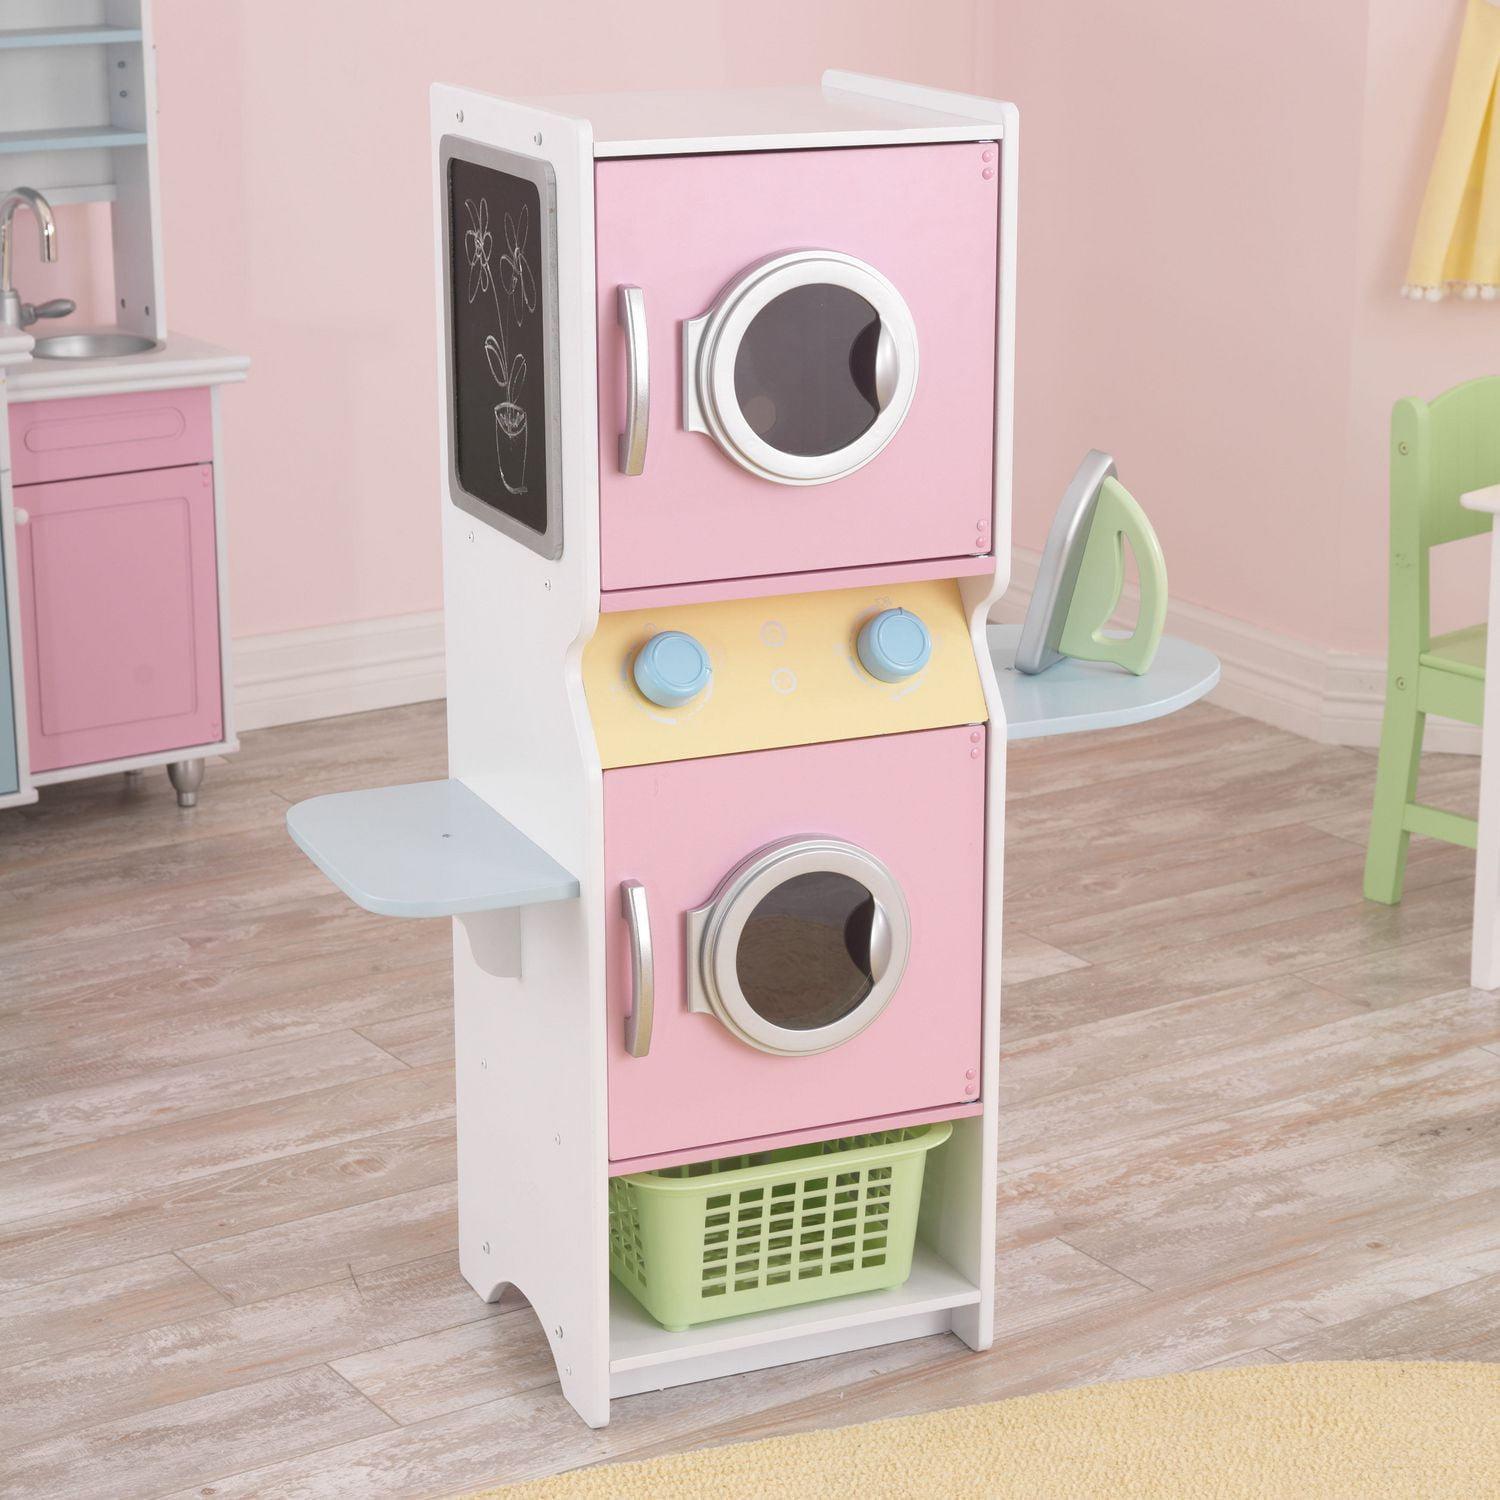 KidKraft Laundry Children's Pretend Play Wooden Stacking Washer and Dryer  Toy - Paper People Play